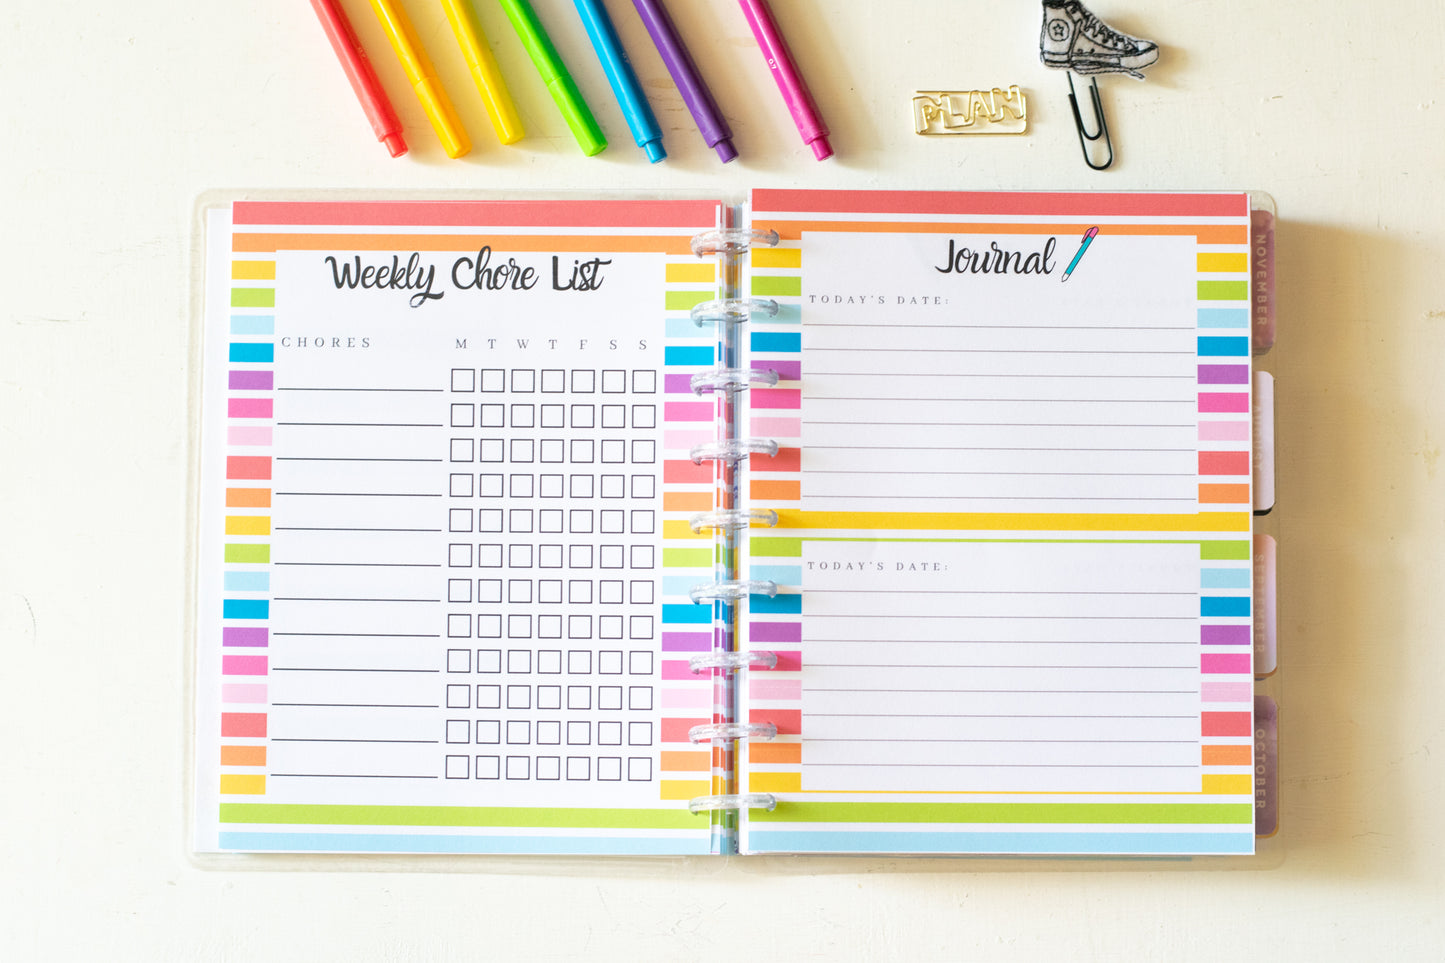 Rainbow Day Planner Inserts for Happy Planner